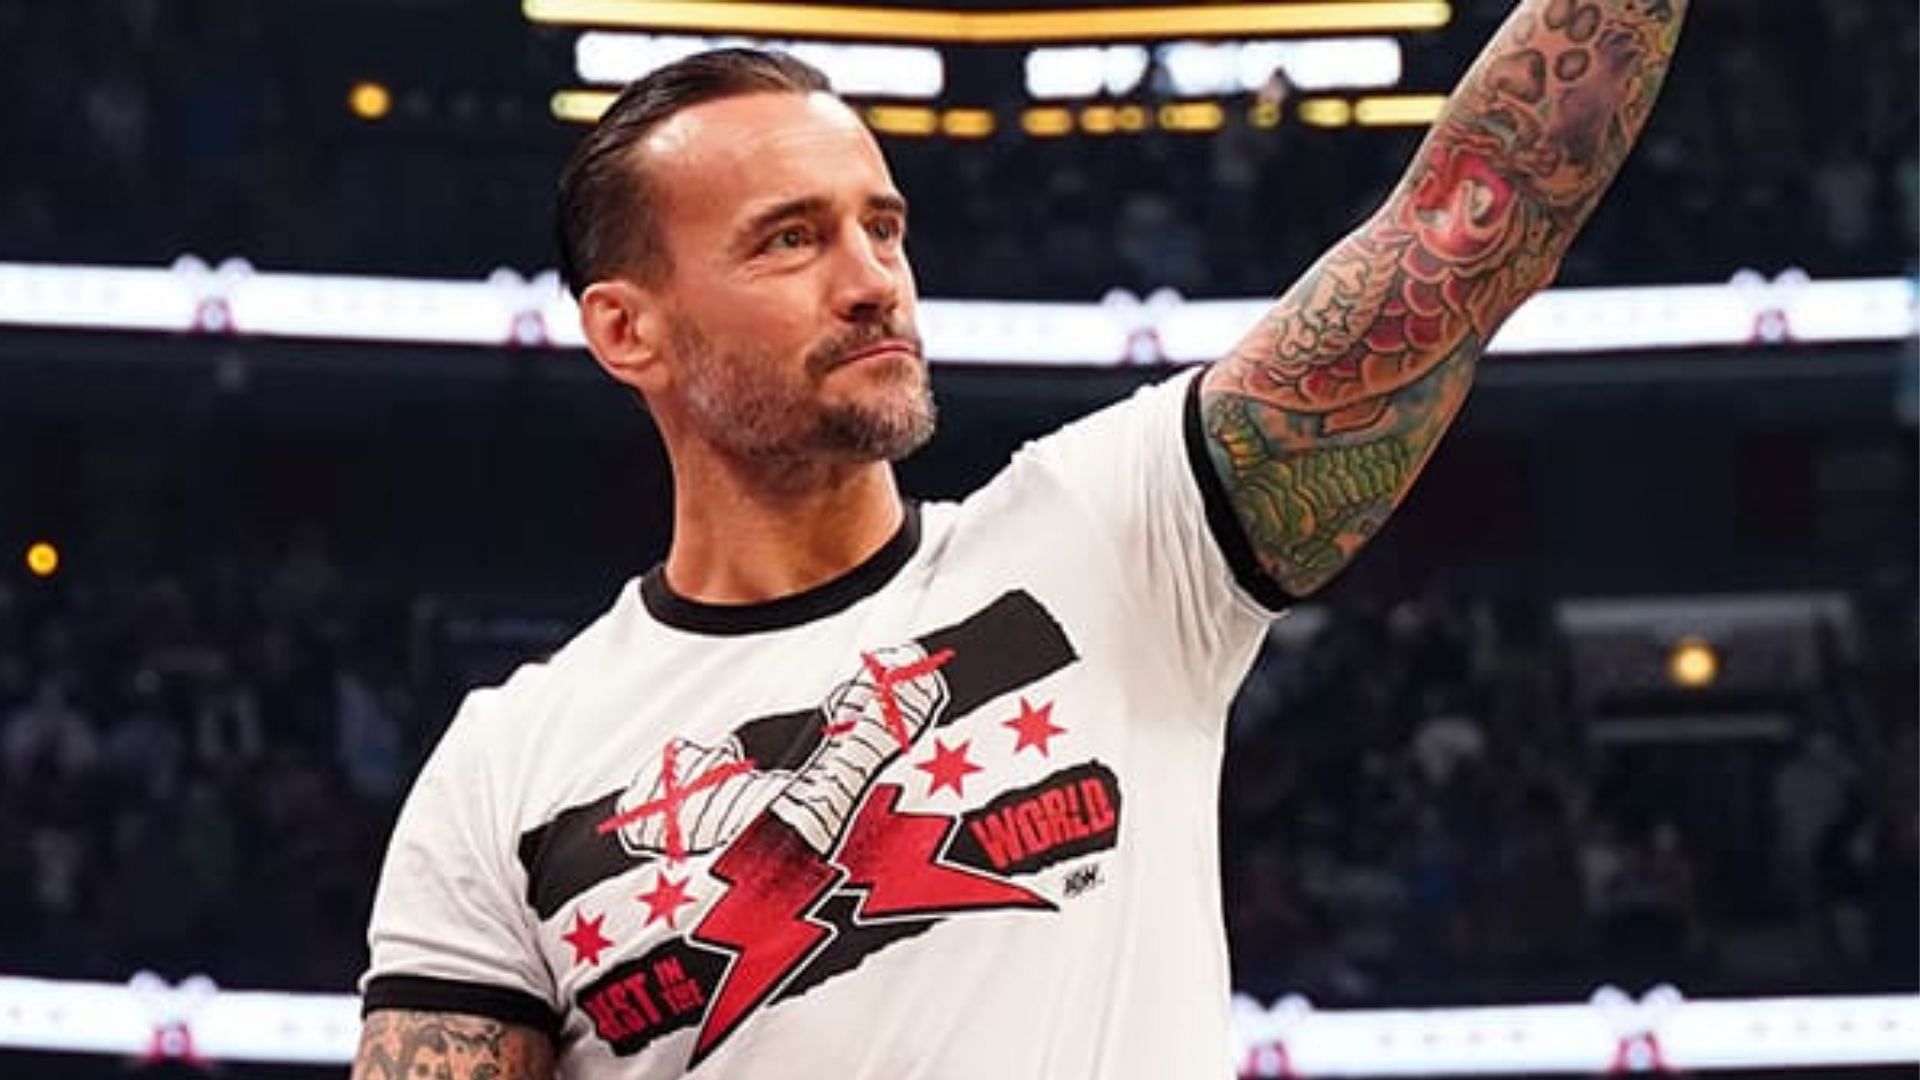 Which faction would CM Punk be the leader of if an AEW star had his way?